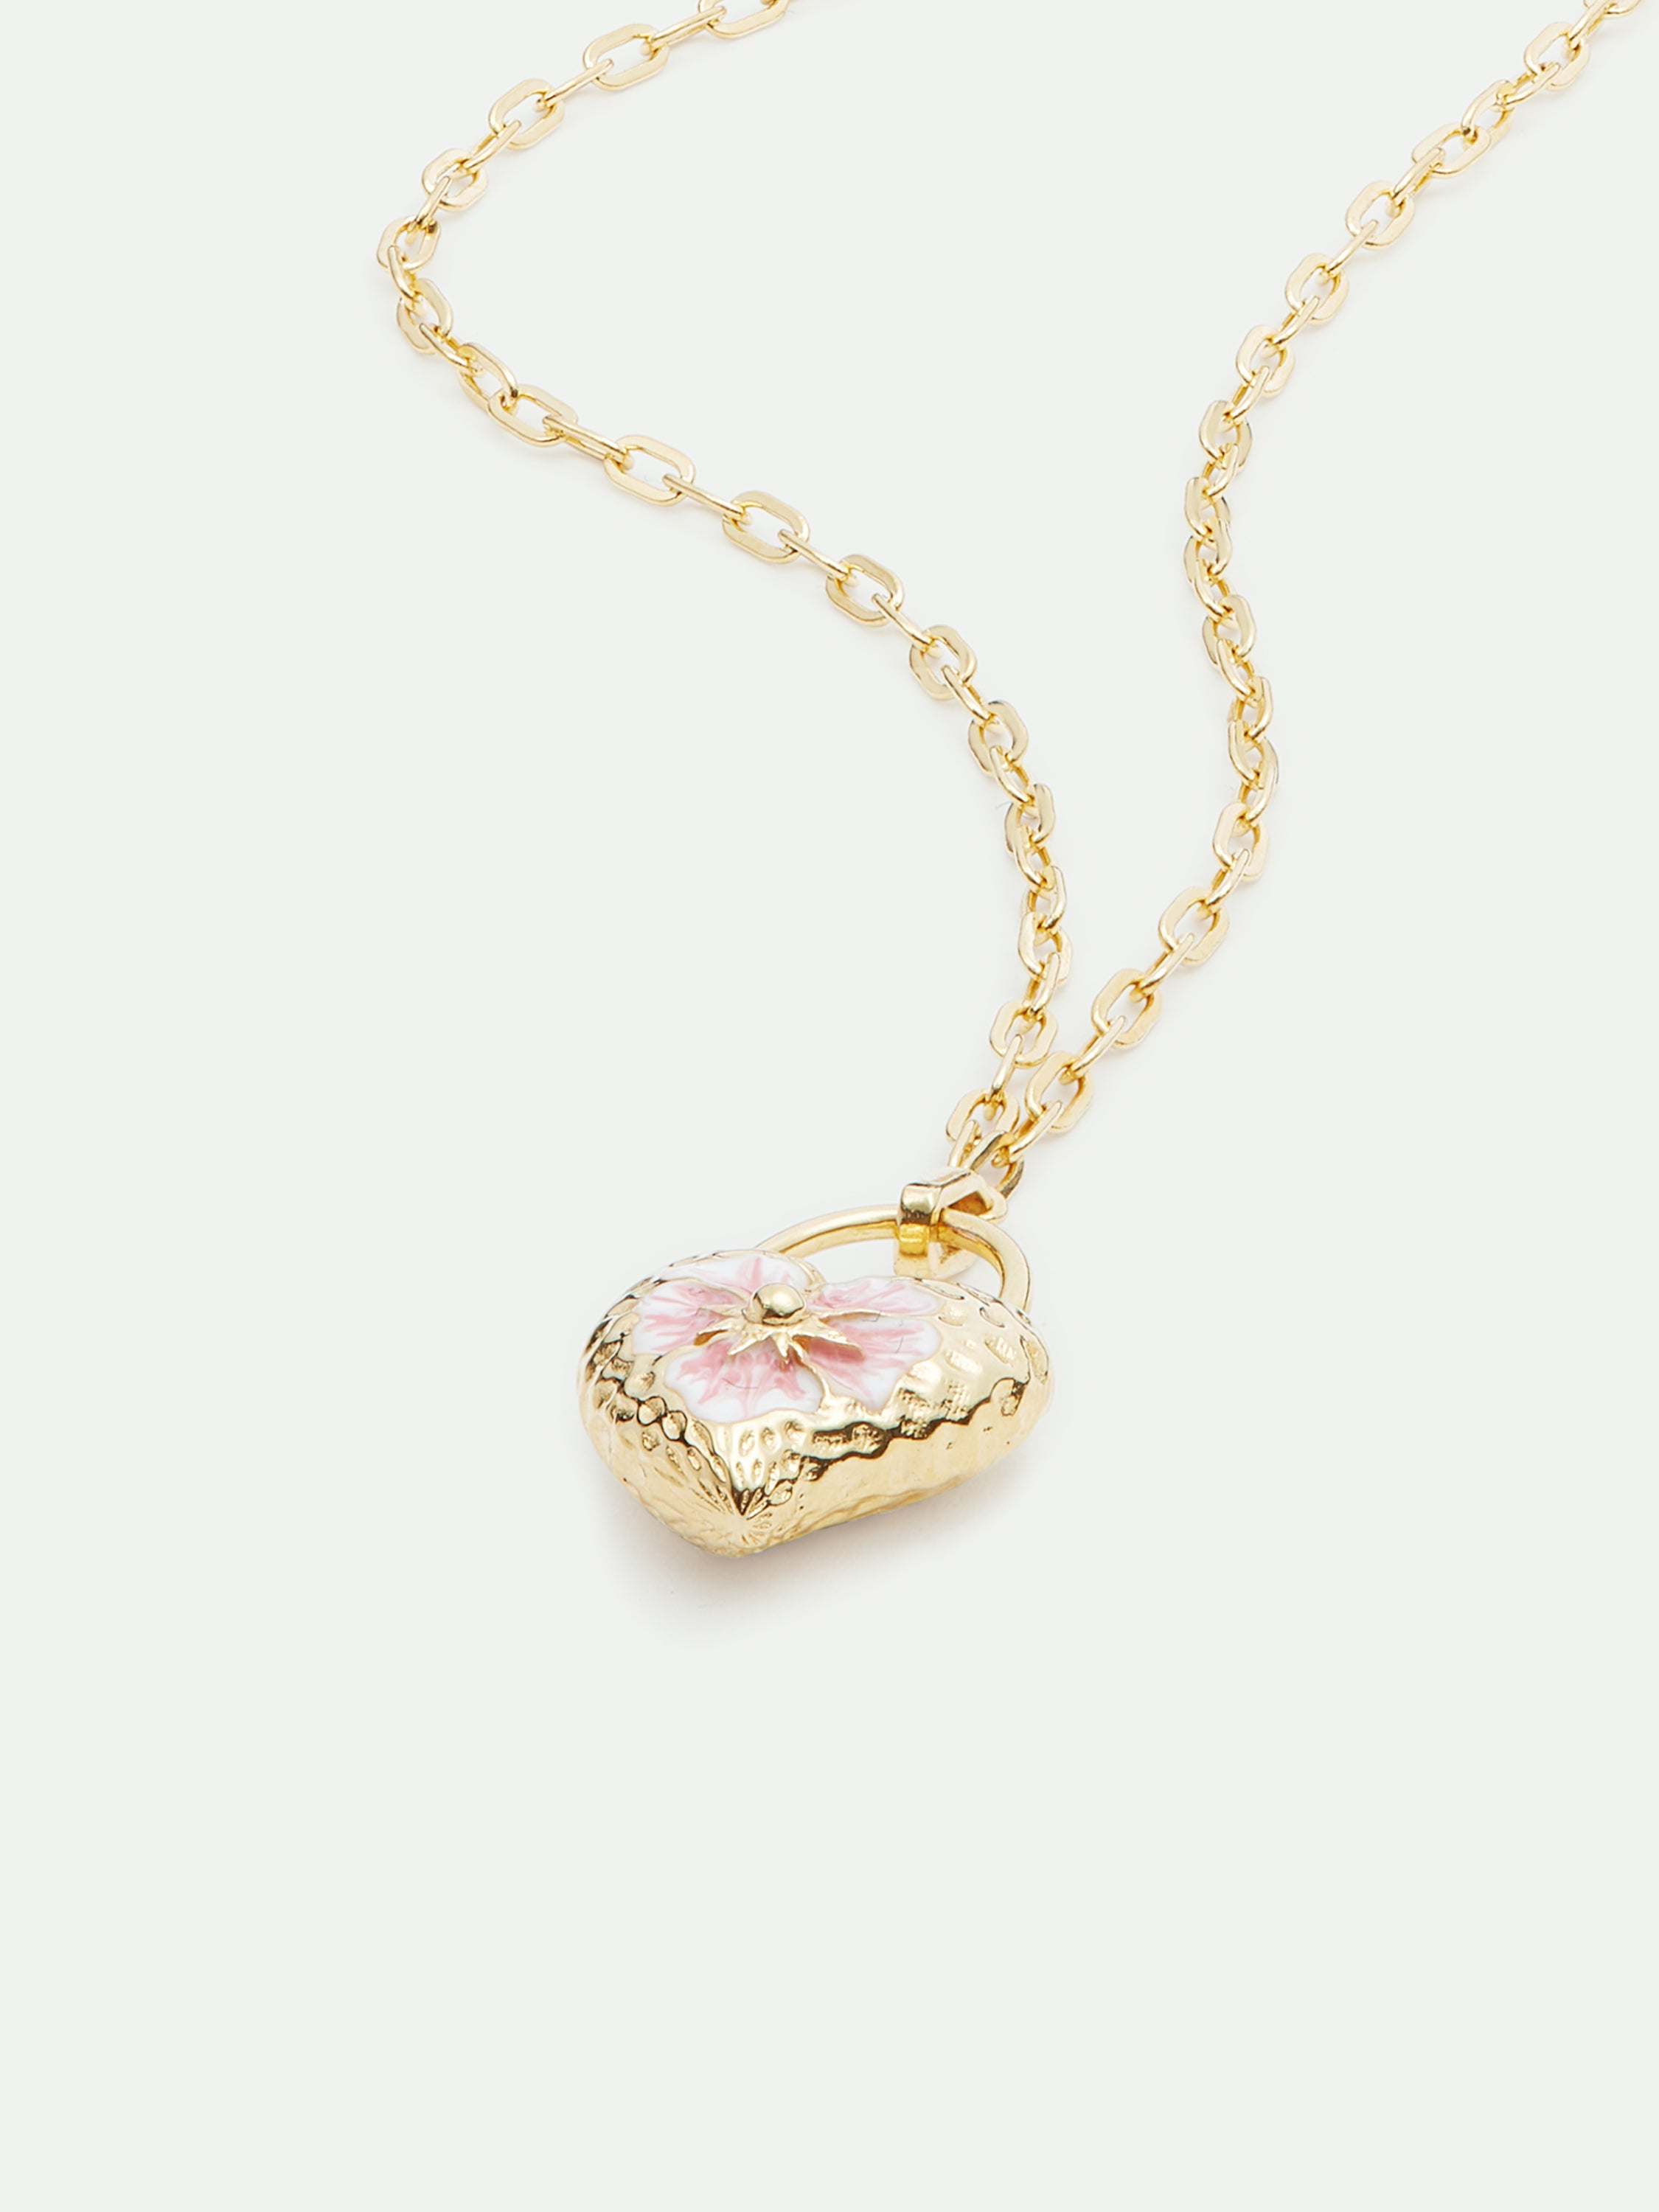 Heart medallion and pansy flower pendant necklace